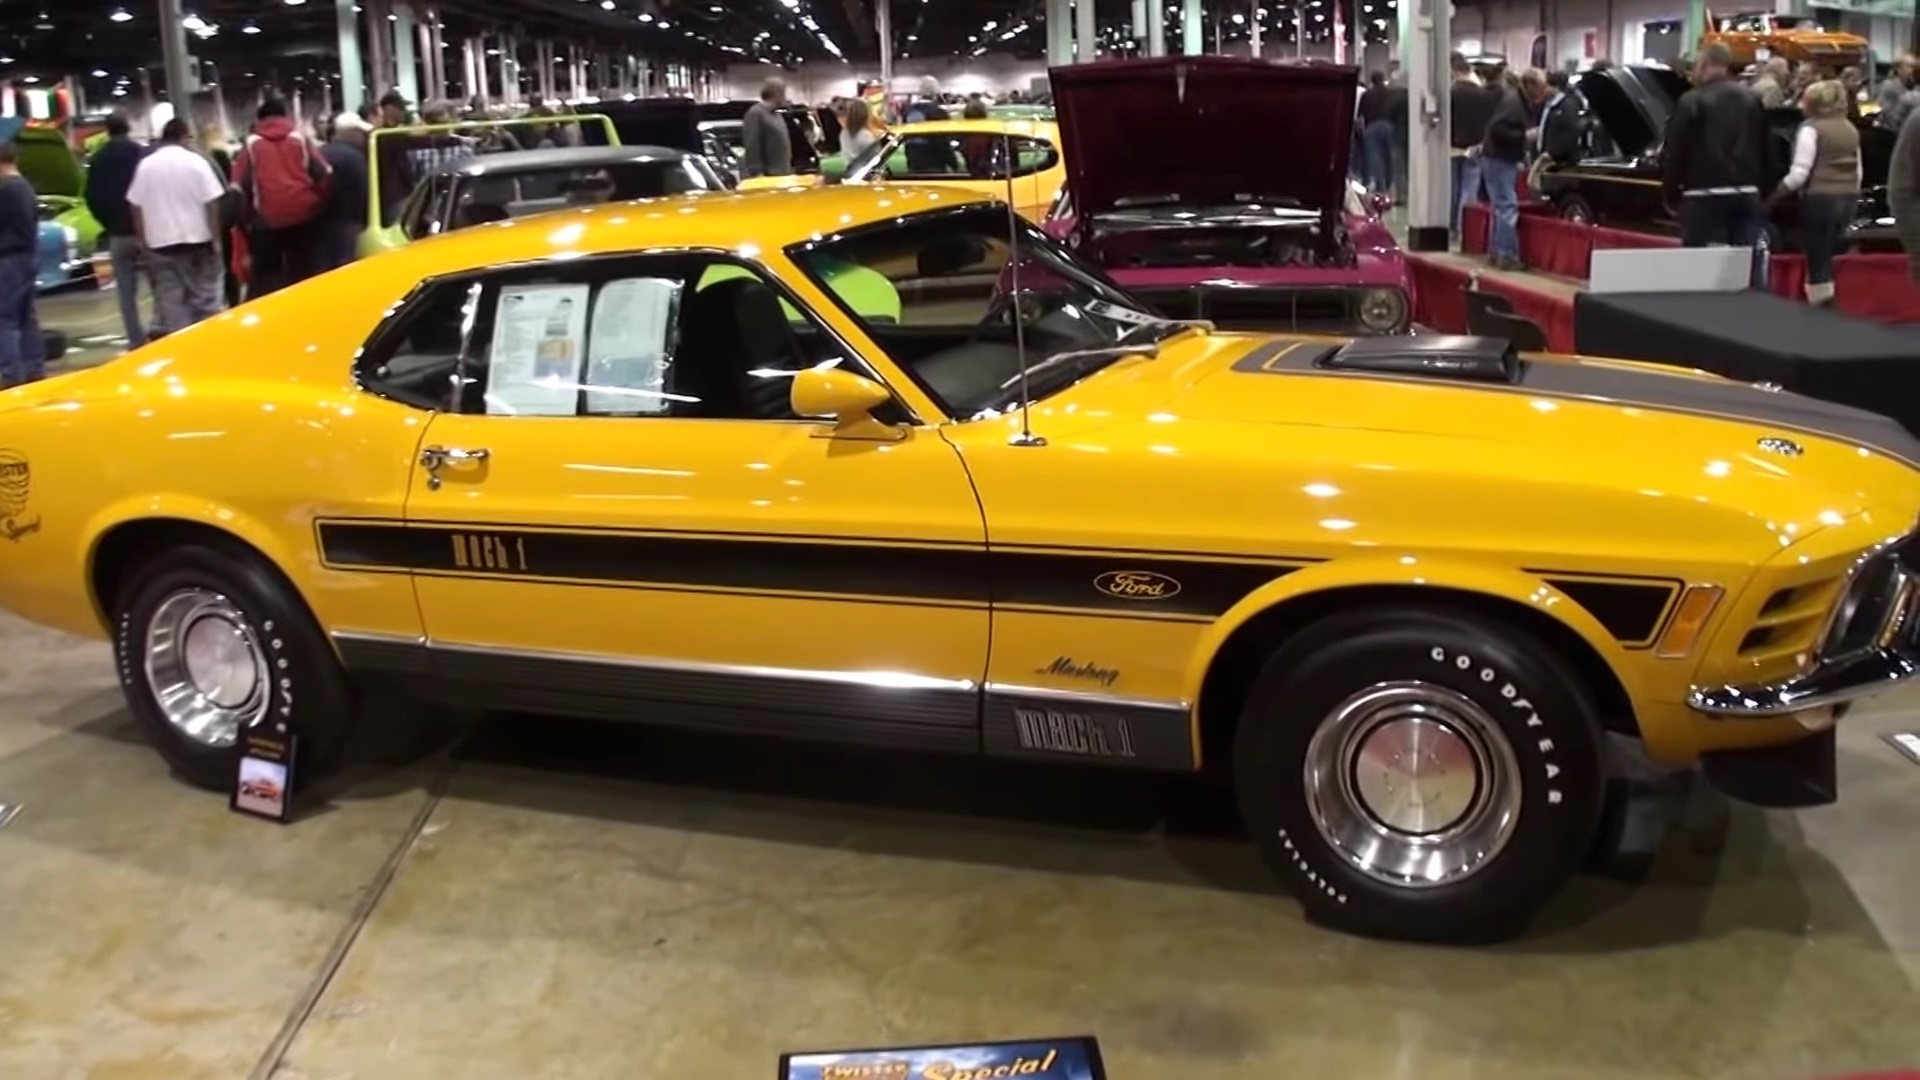 Video: Check Out The Special Story Behind This 1970 Ford Mustang Twister Special